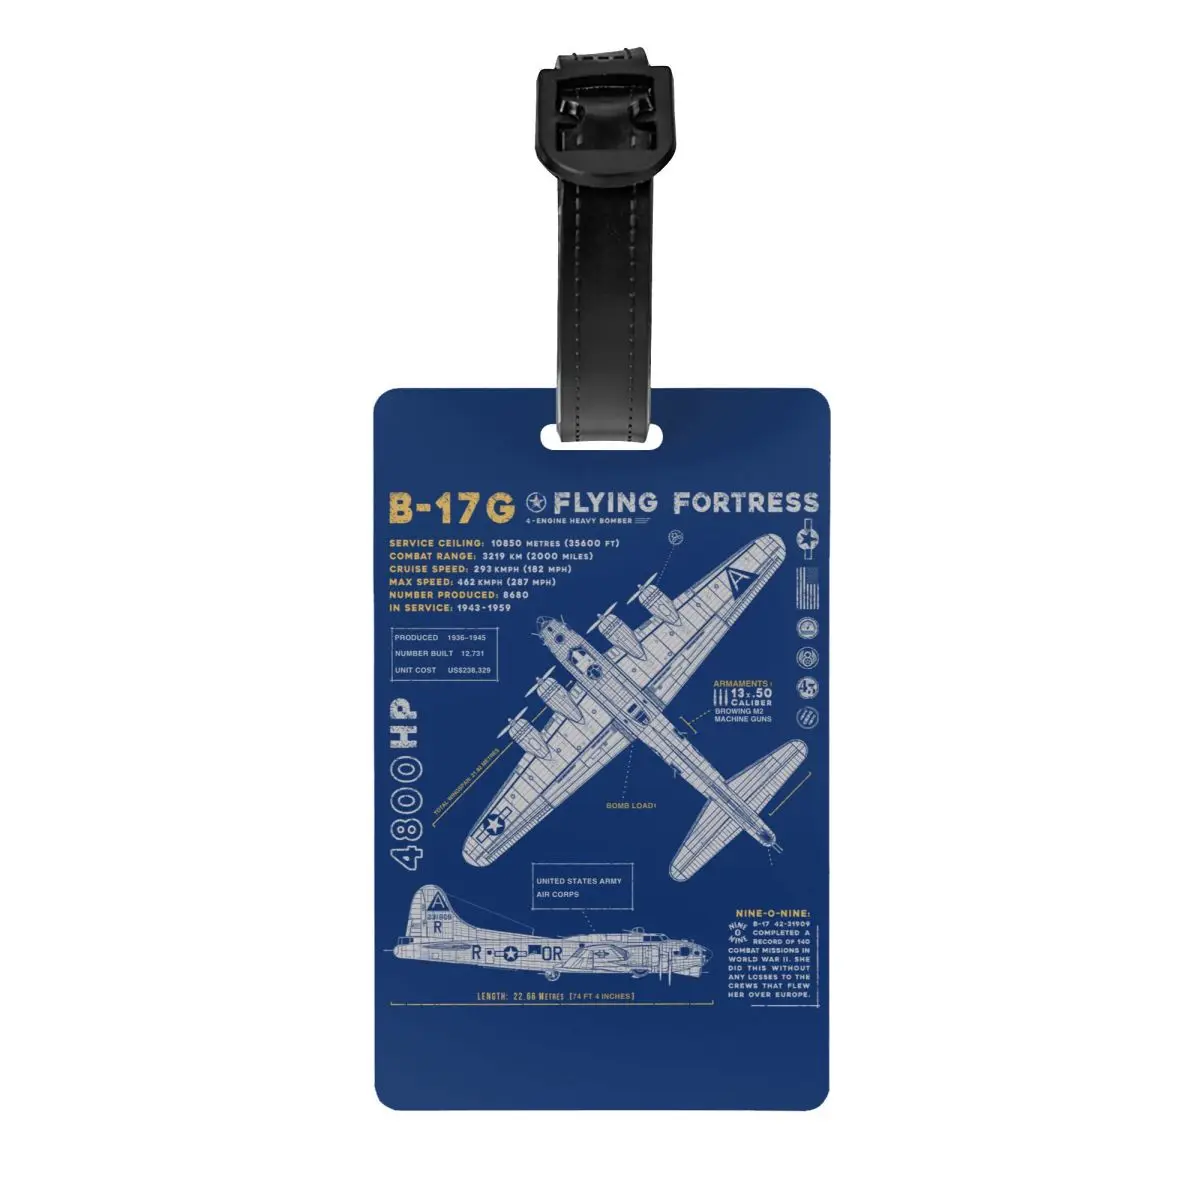 

Vintage B-17 Flying Fortress Spitfire Luggage Tag Fighter Plane WW2 War Pilot Aircraft Airplane Travel Bag Suitcase Cover Label